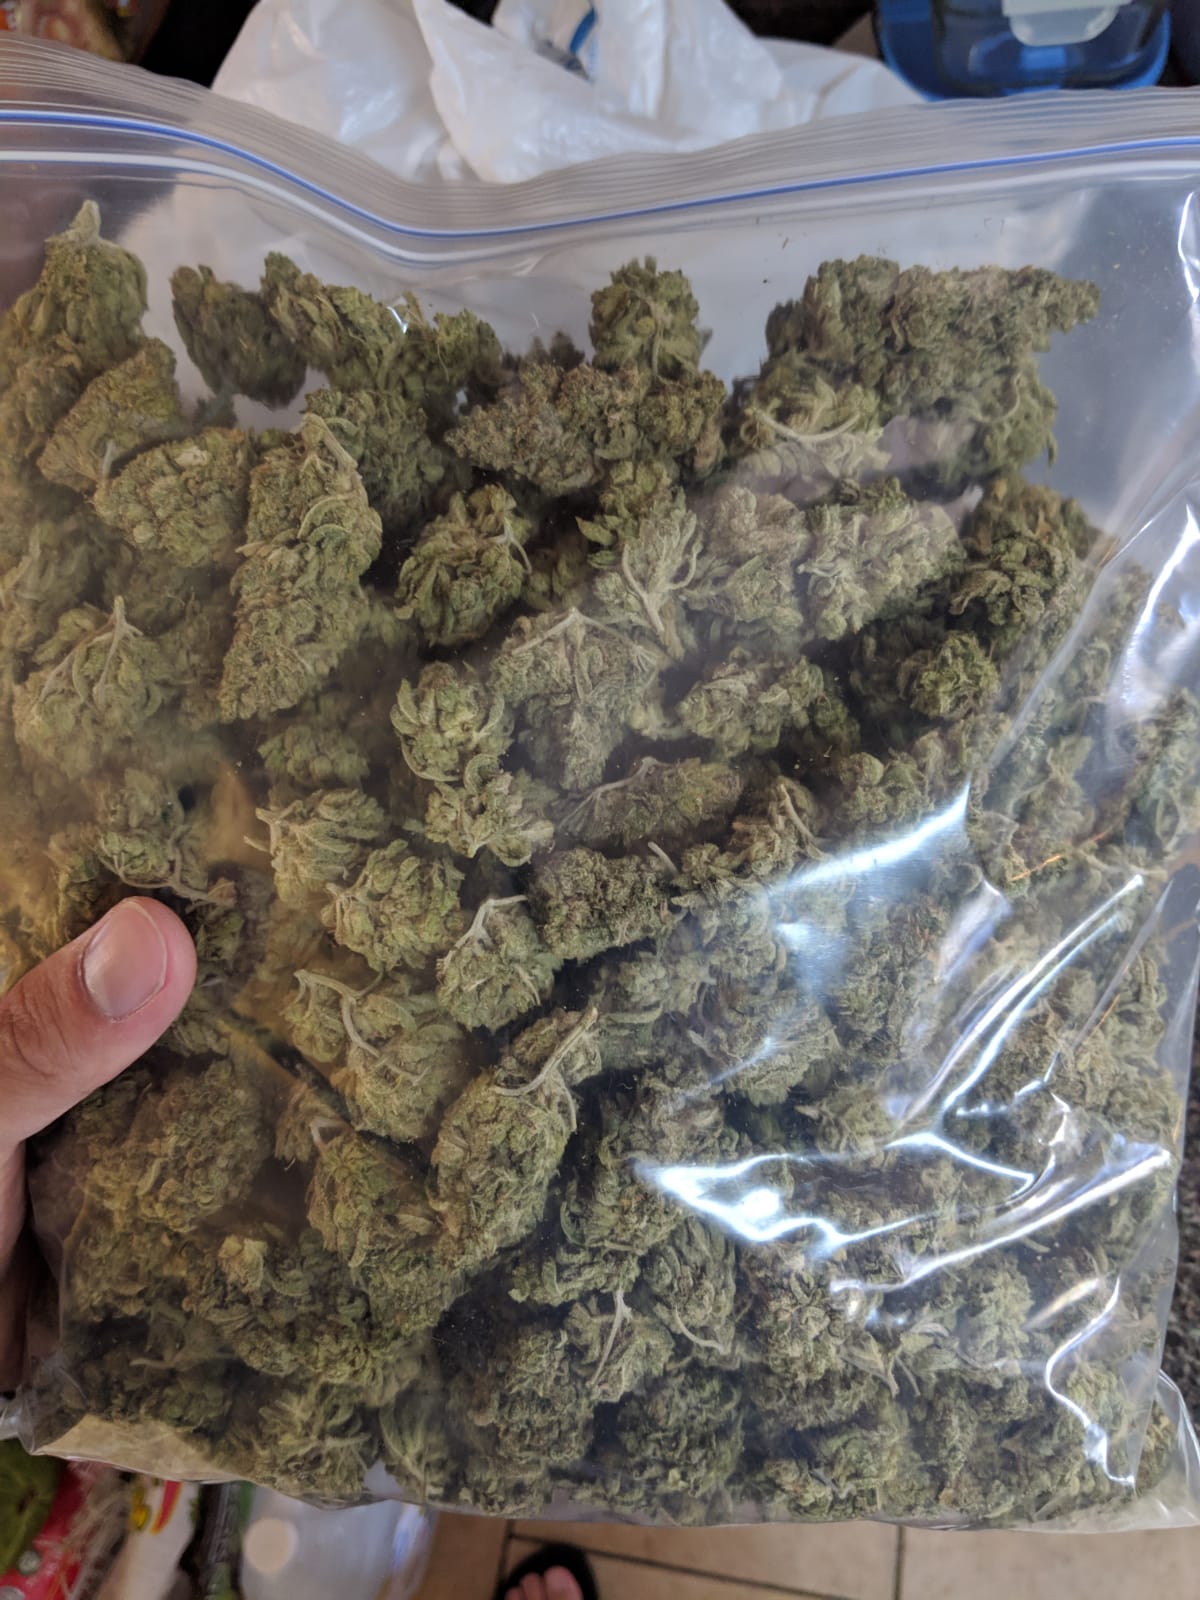 How Much Does a Pound of Weed Cost? 